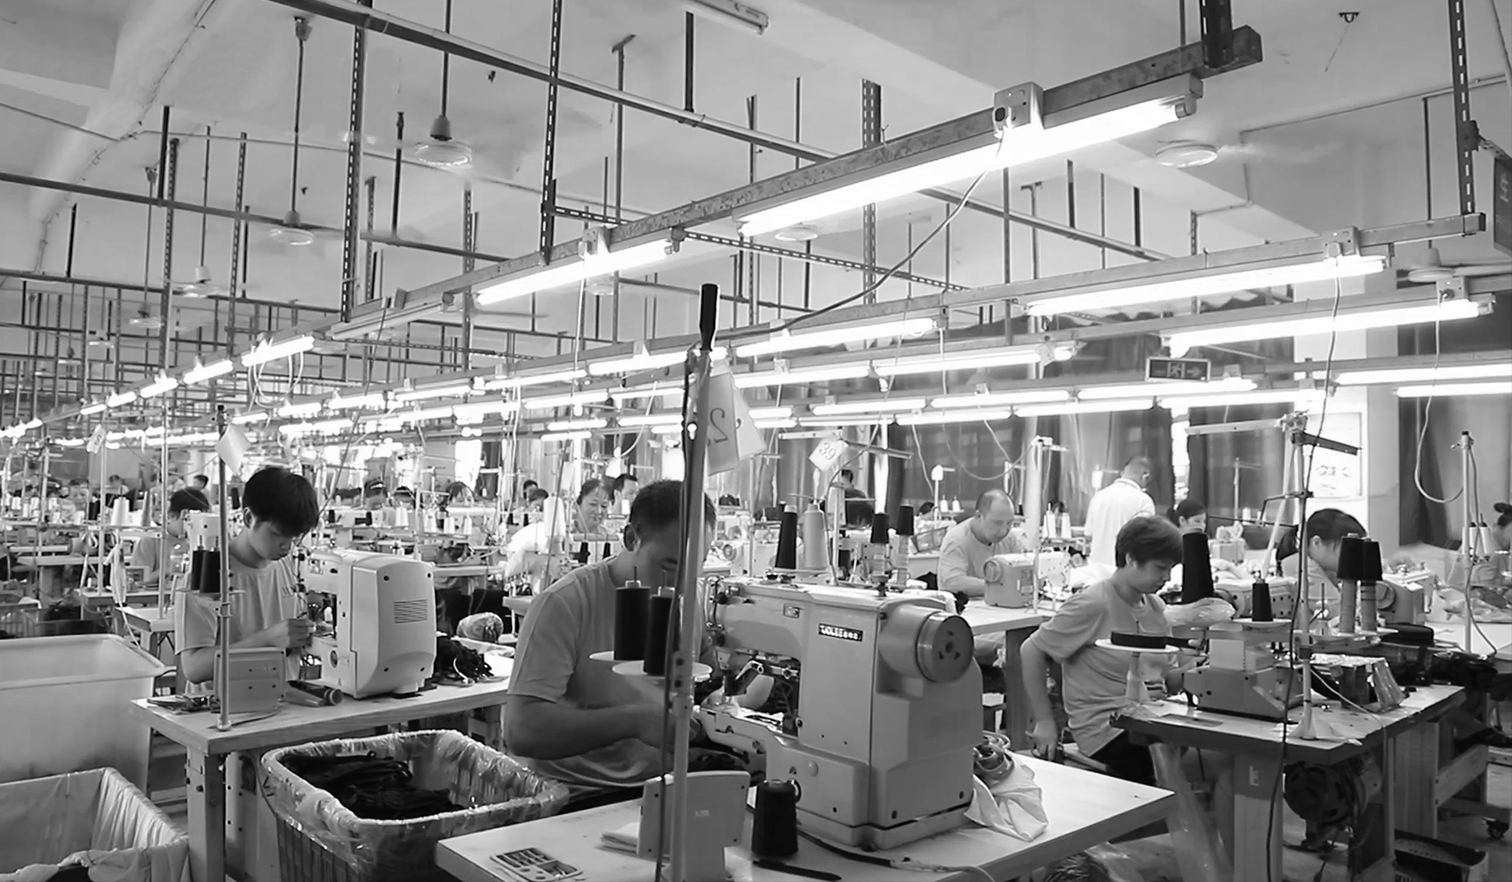 Exploring the Garment Factory: A Journey of Discovery